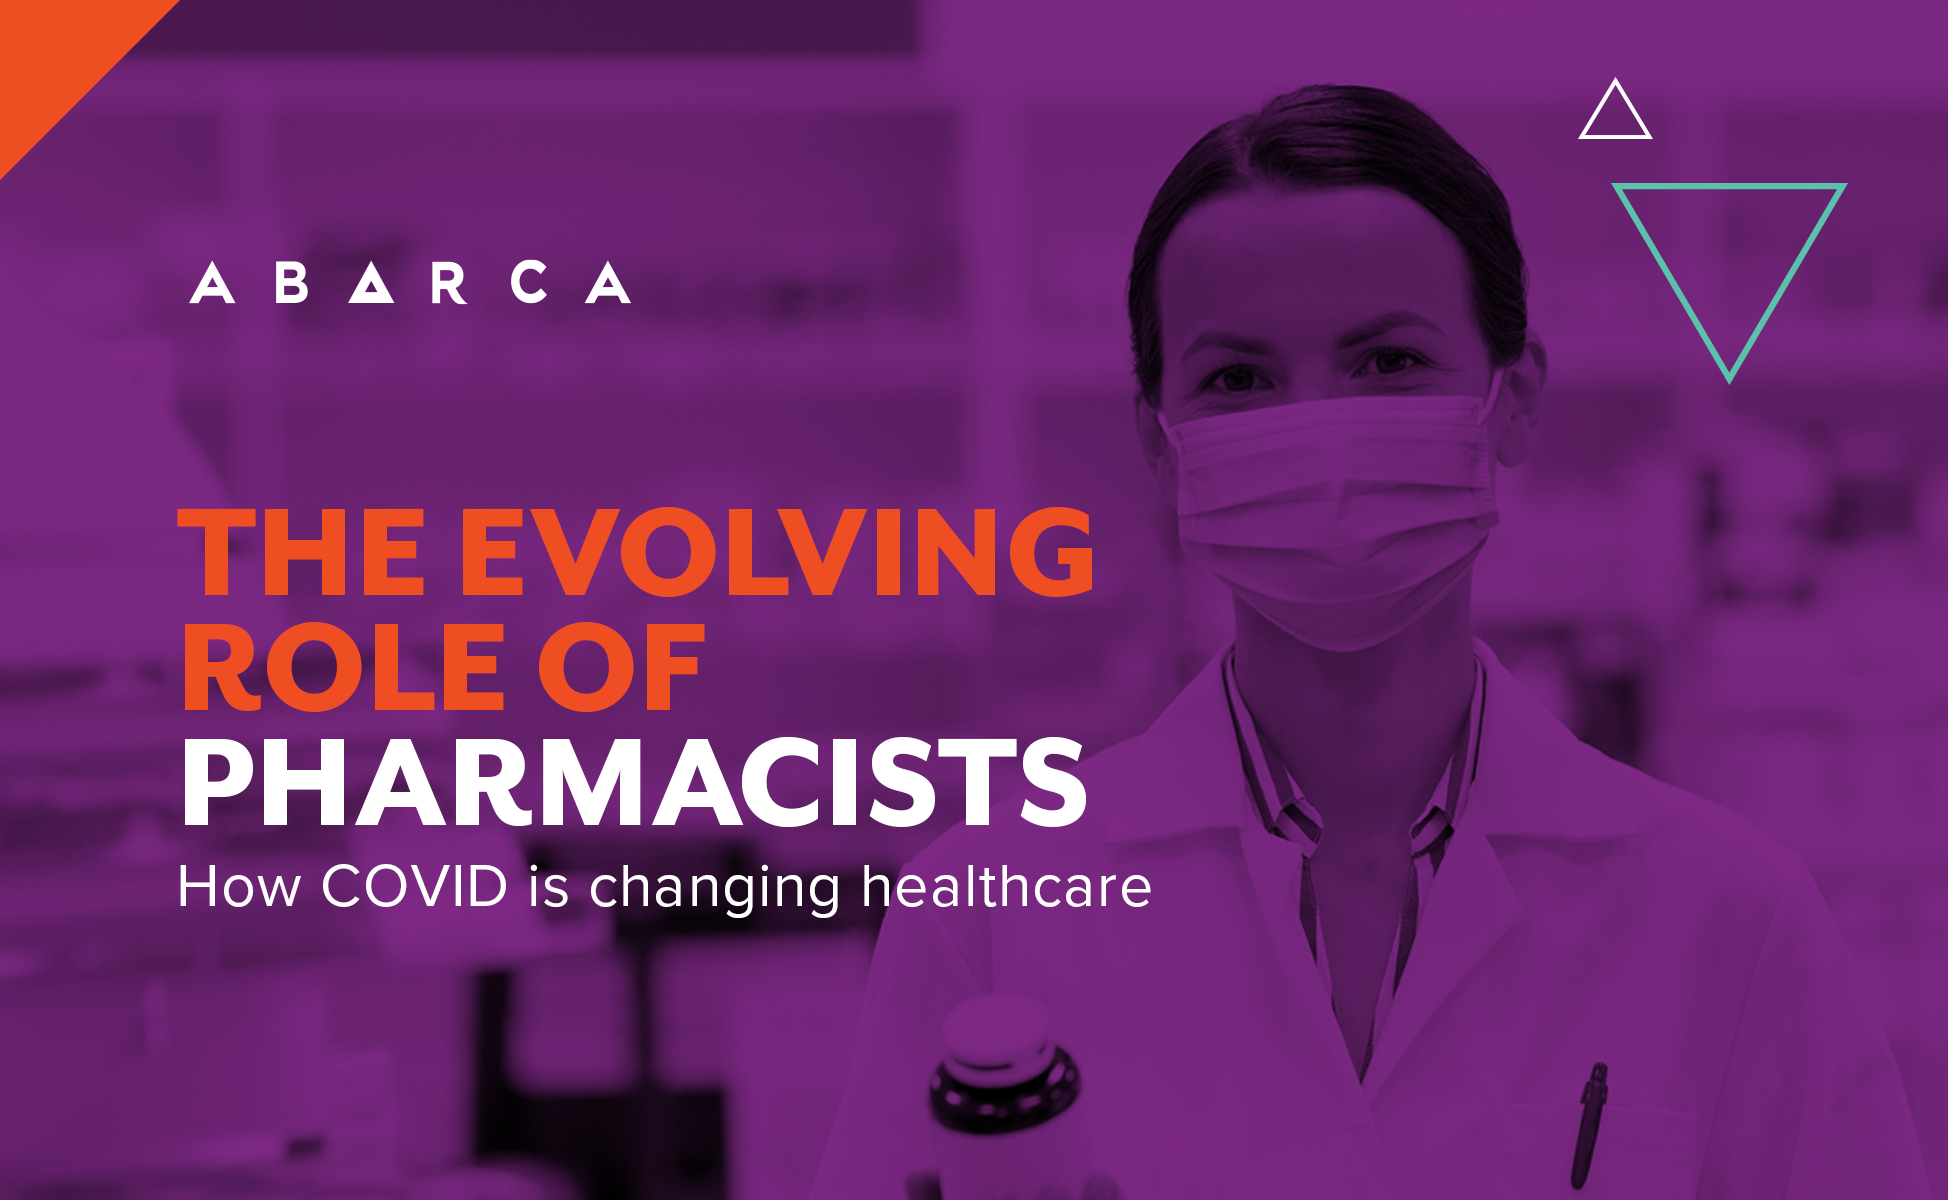 Abarca Health: The Evolving Role of Pharmacists